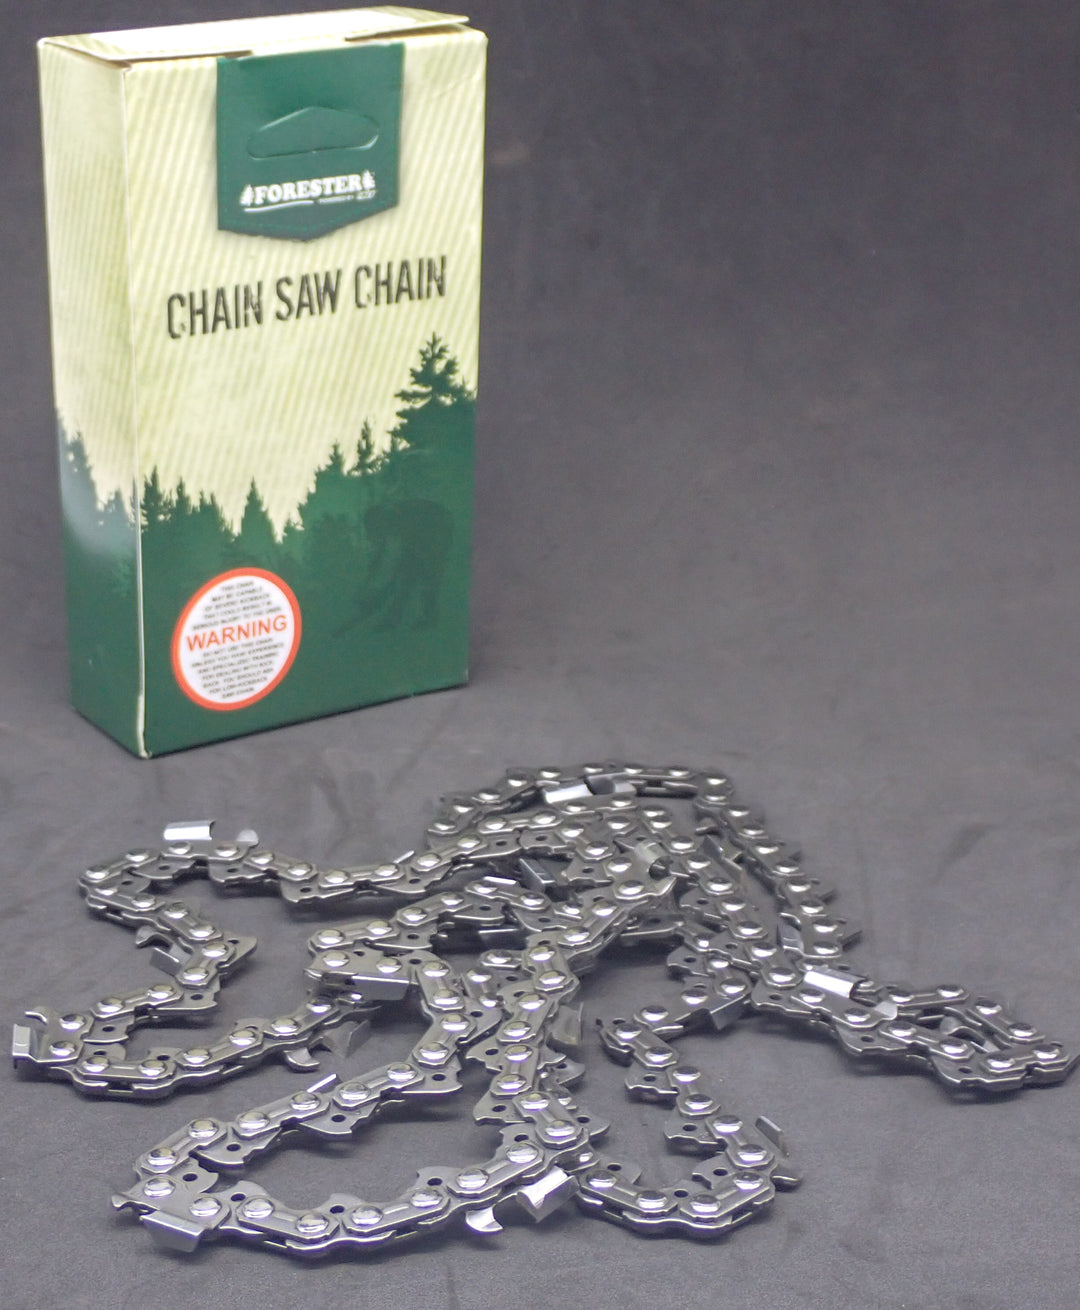 FORESTER FULL CHISEL SKIP TOOTH CHAINSAW CHAIN 3/8 .050 91DL